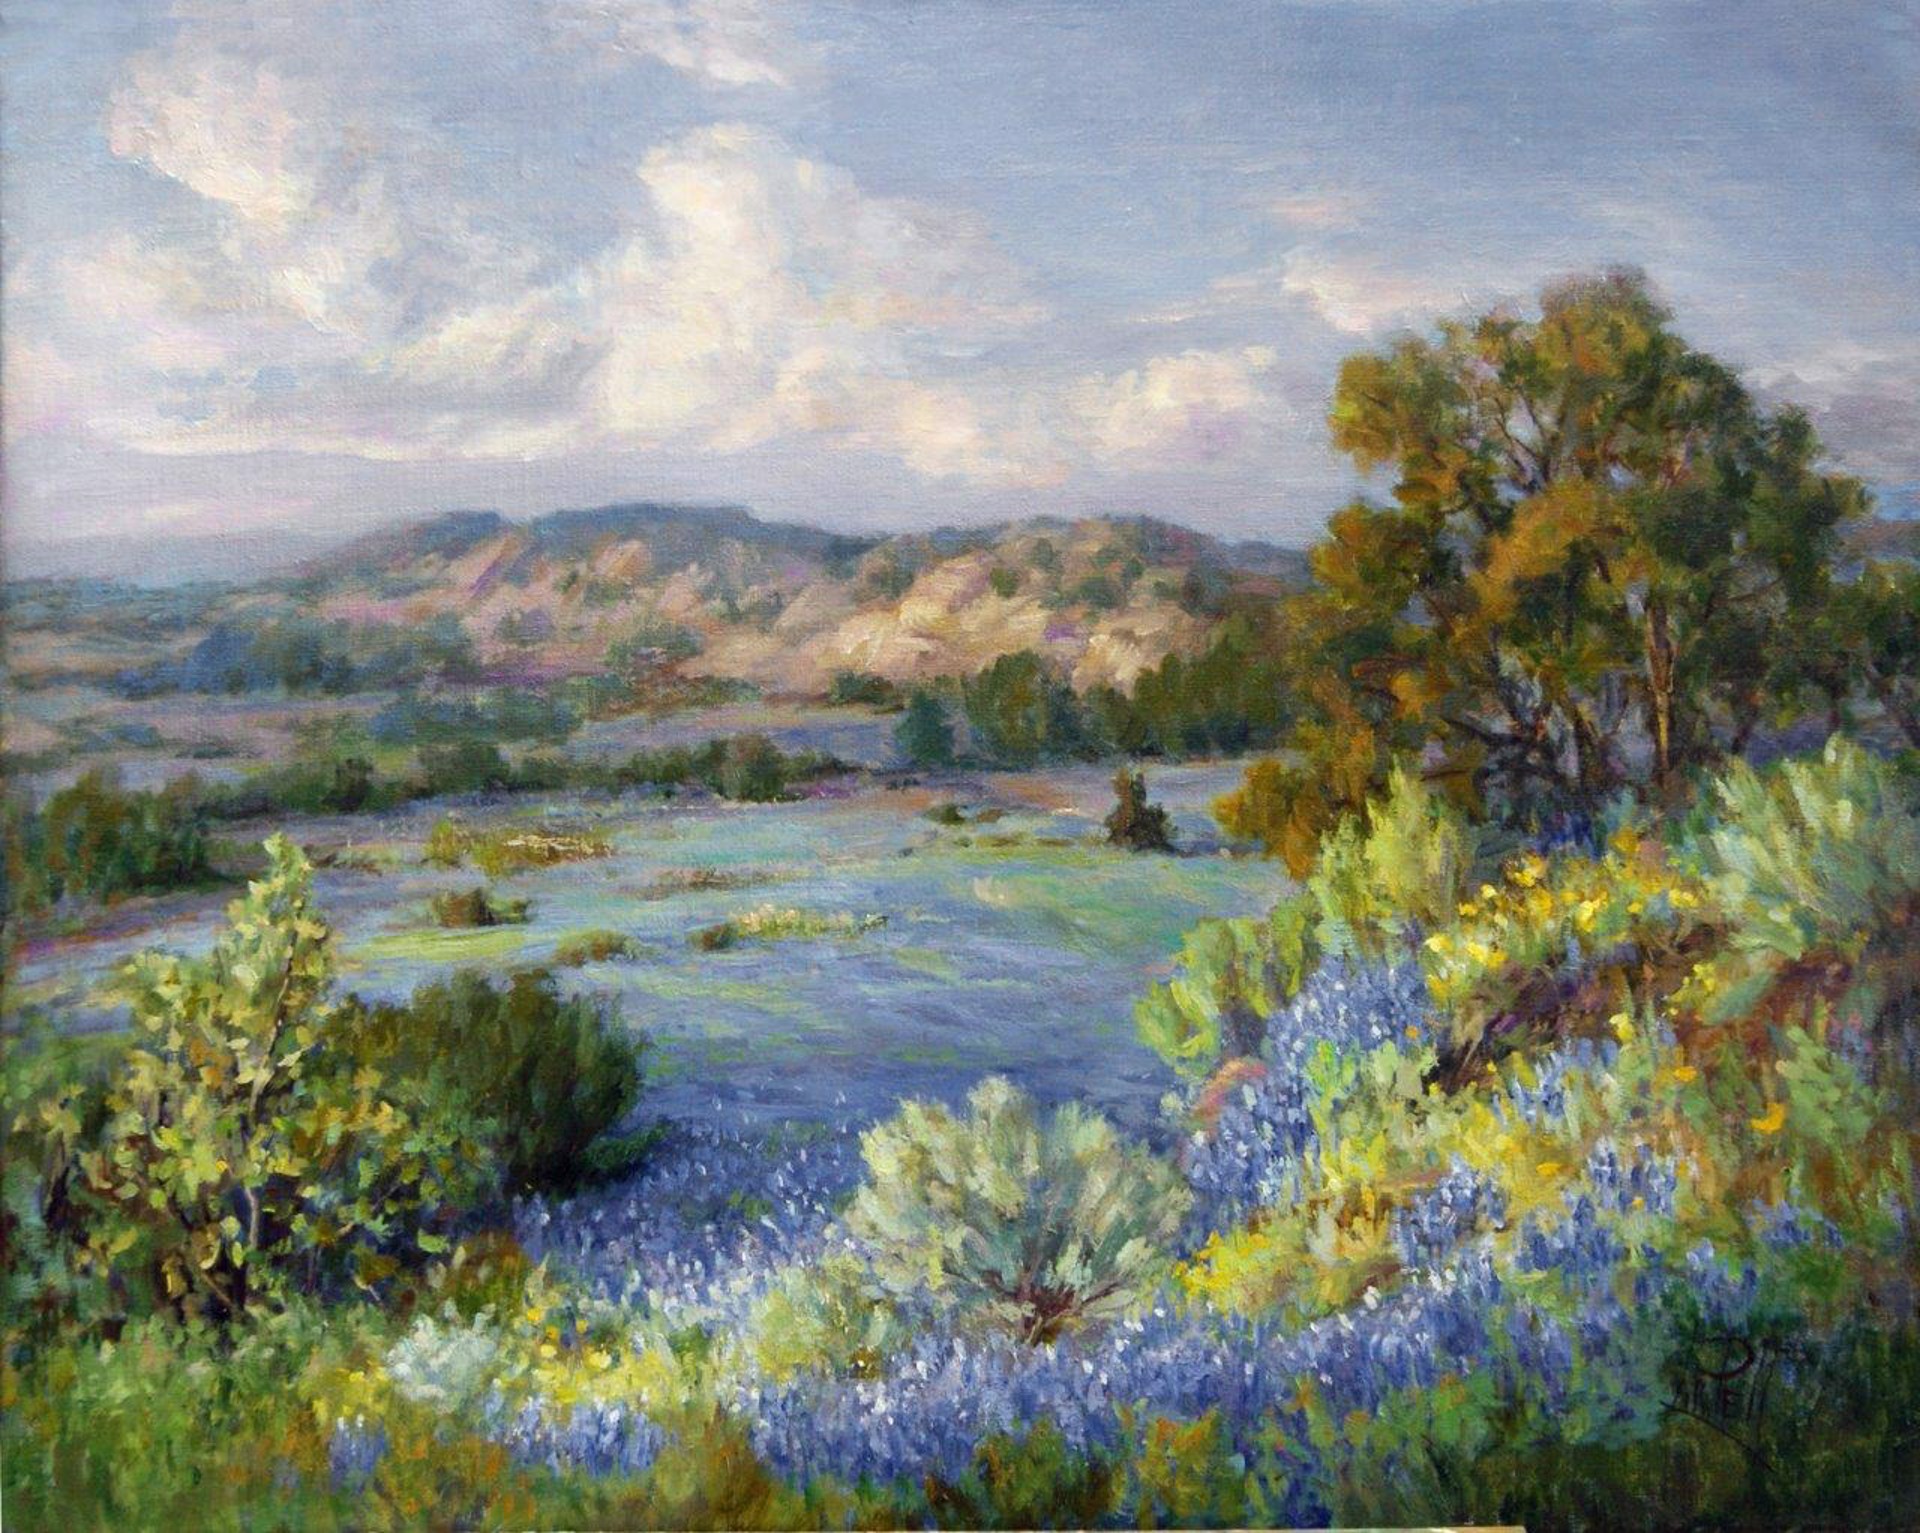 Bluebonnets in the Hills by Lilli Pell